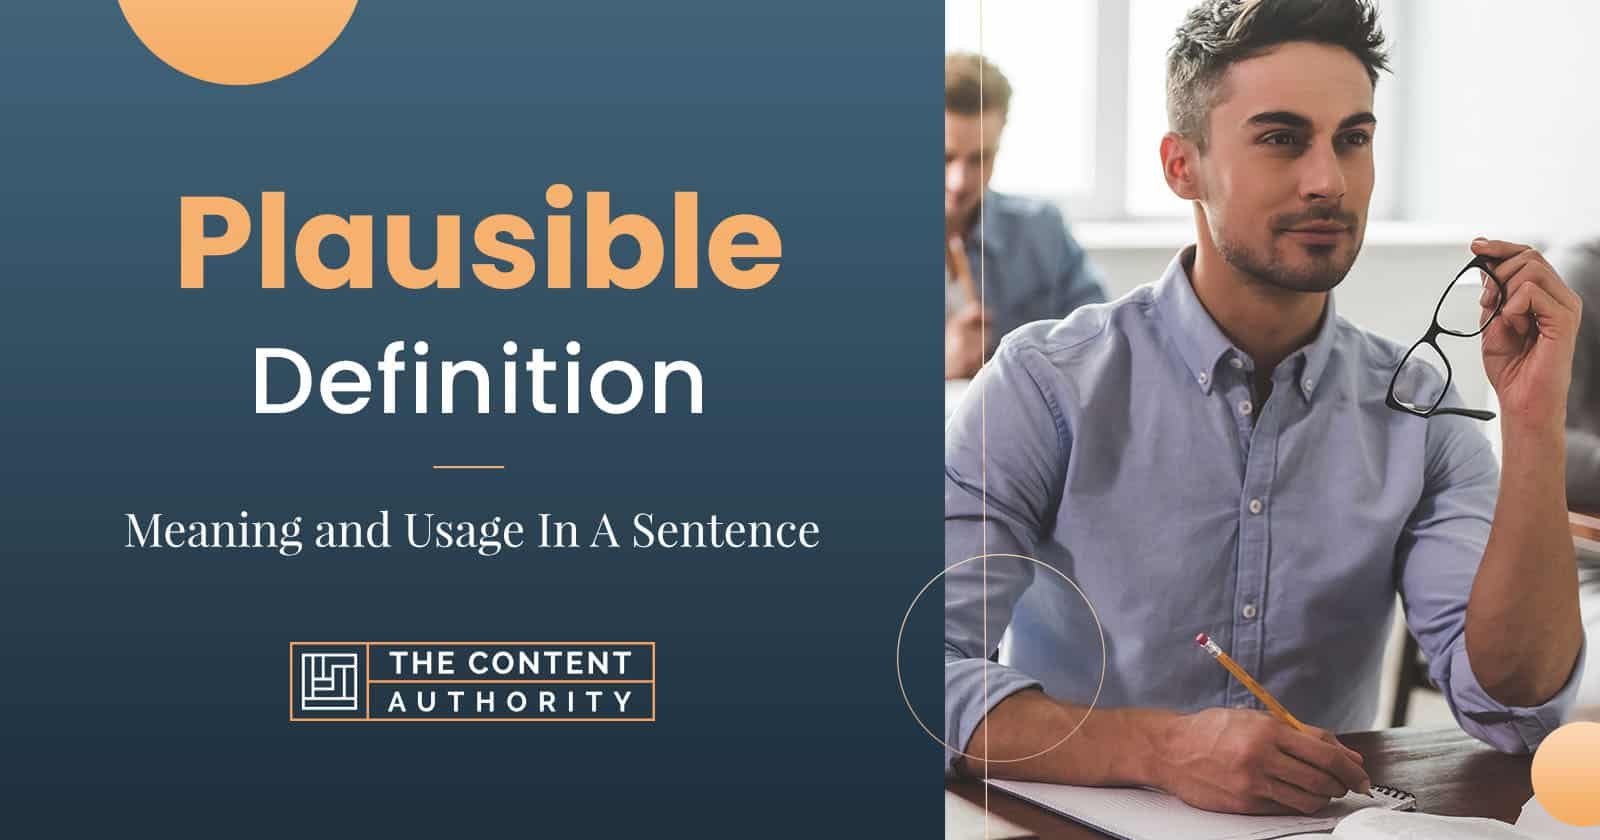 Plausible Definition – Meaning and Usage In A Sentence